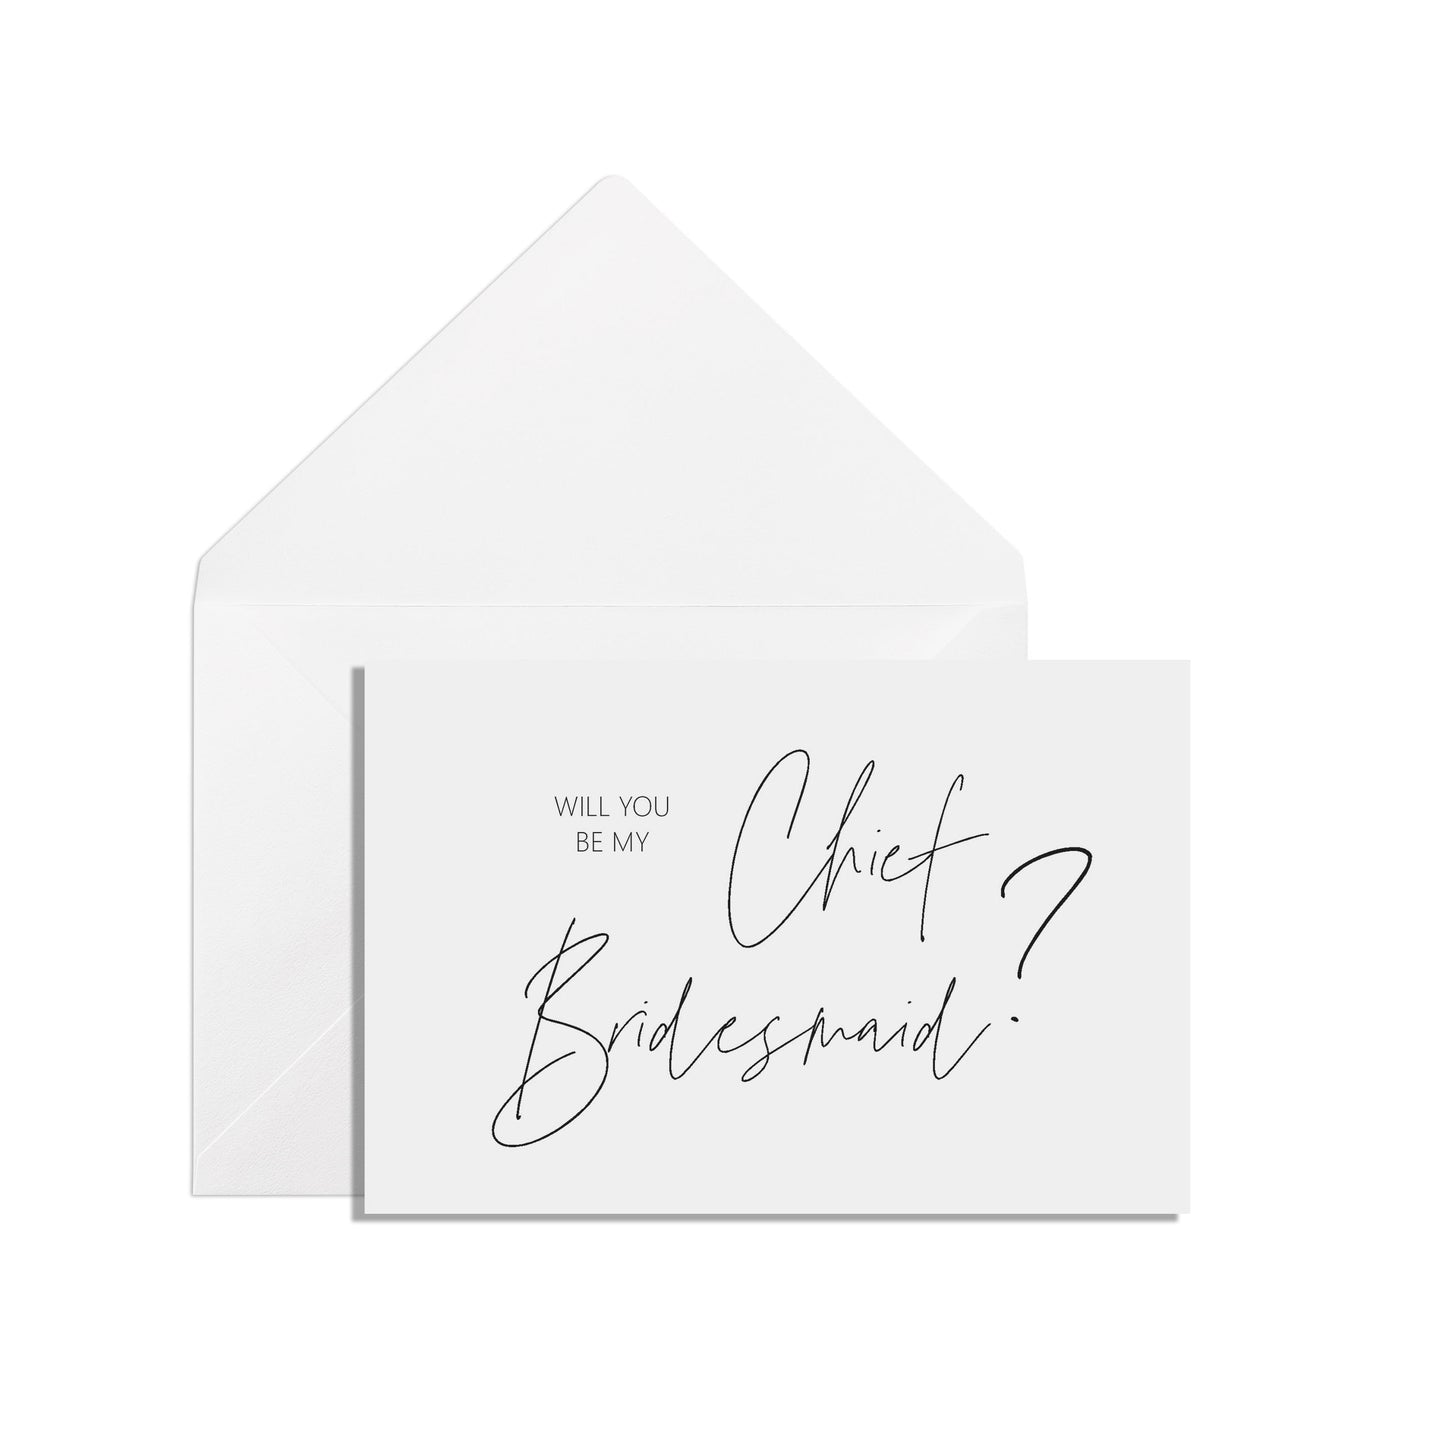 Will You Be My Chief Bridesmaid? A6 Black & White Proposal Card With White Envelope